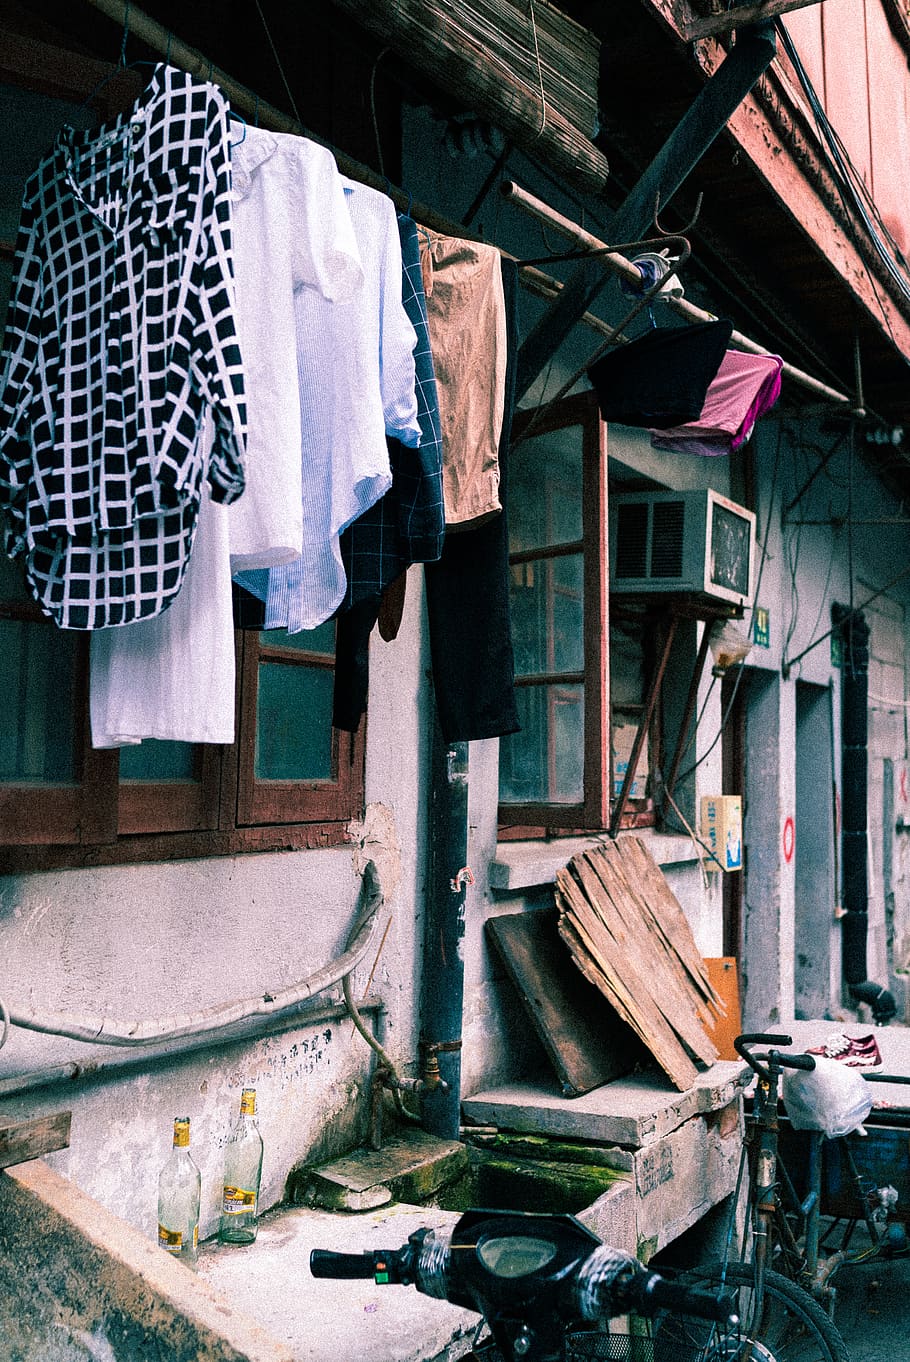 assorted clothes hanged on clothesline outside window, shanghai